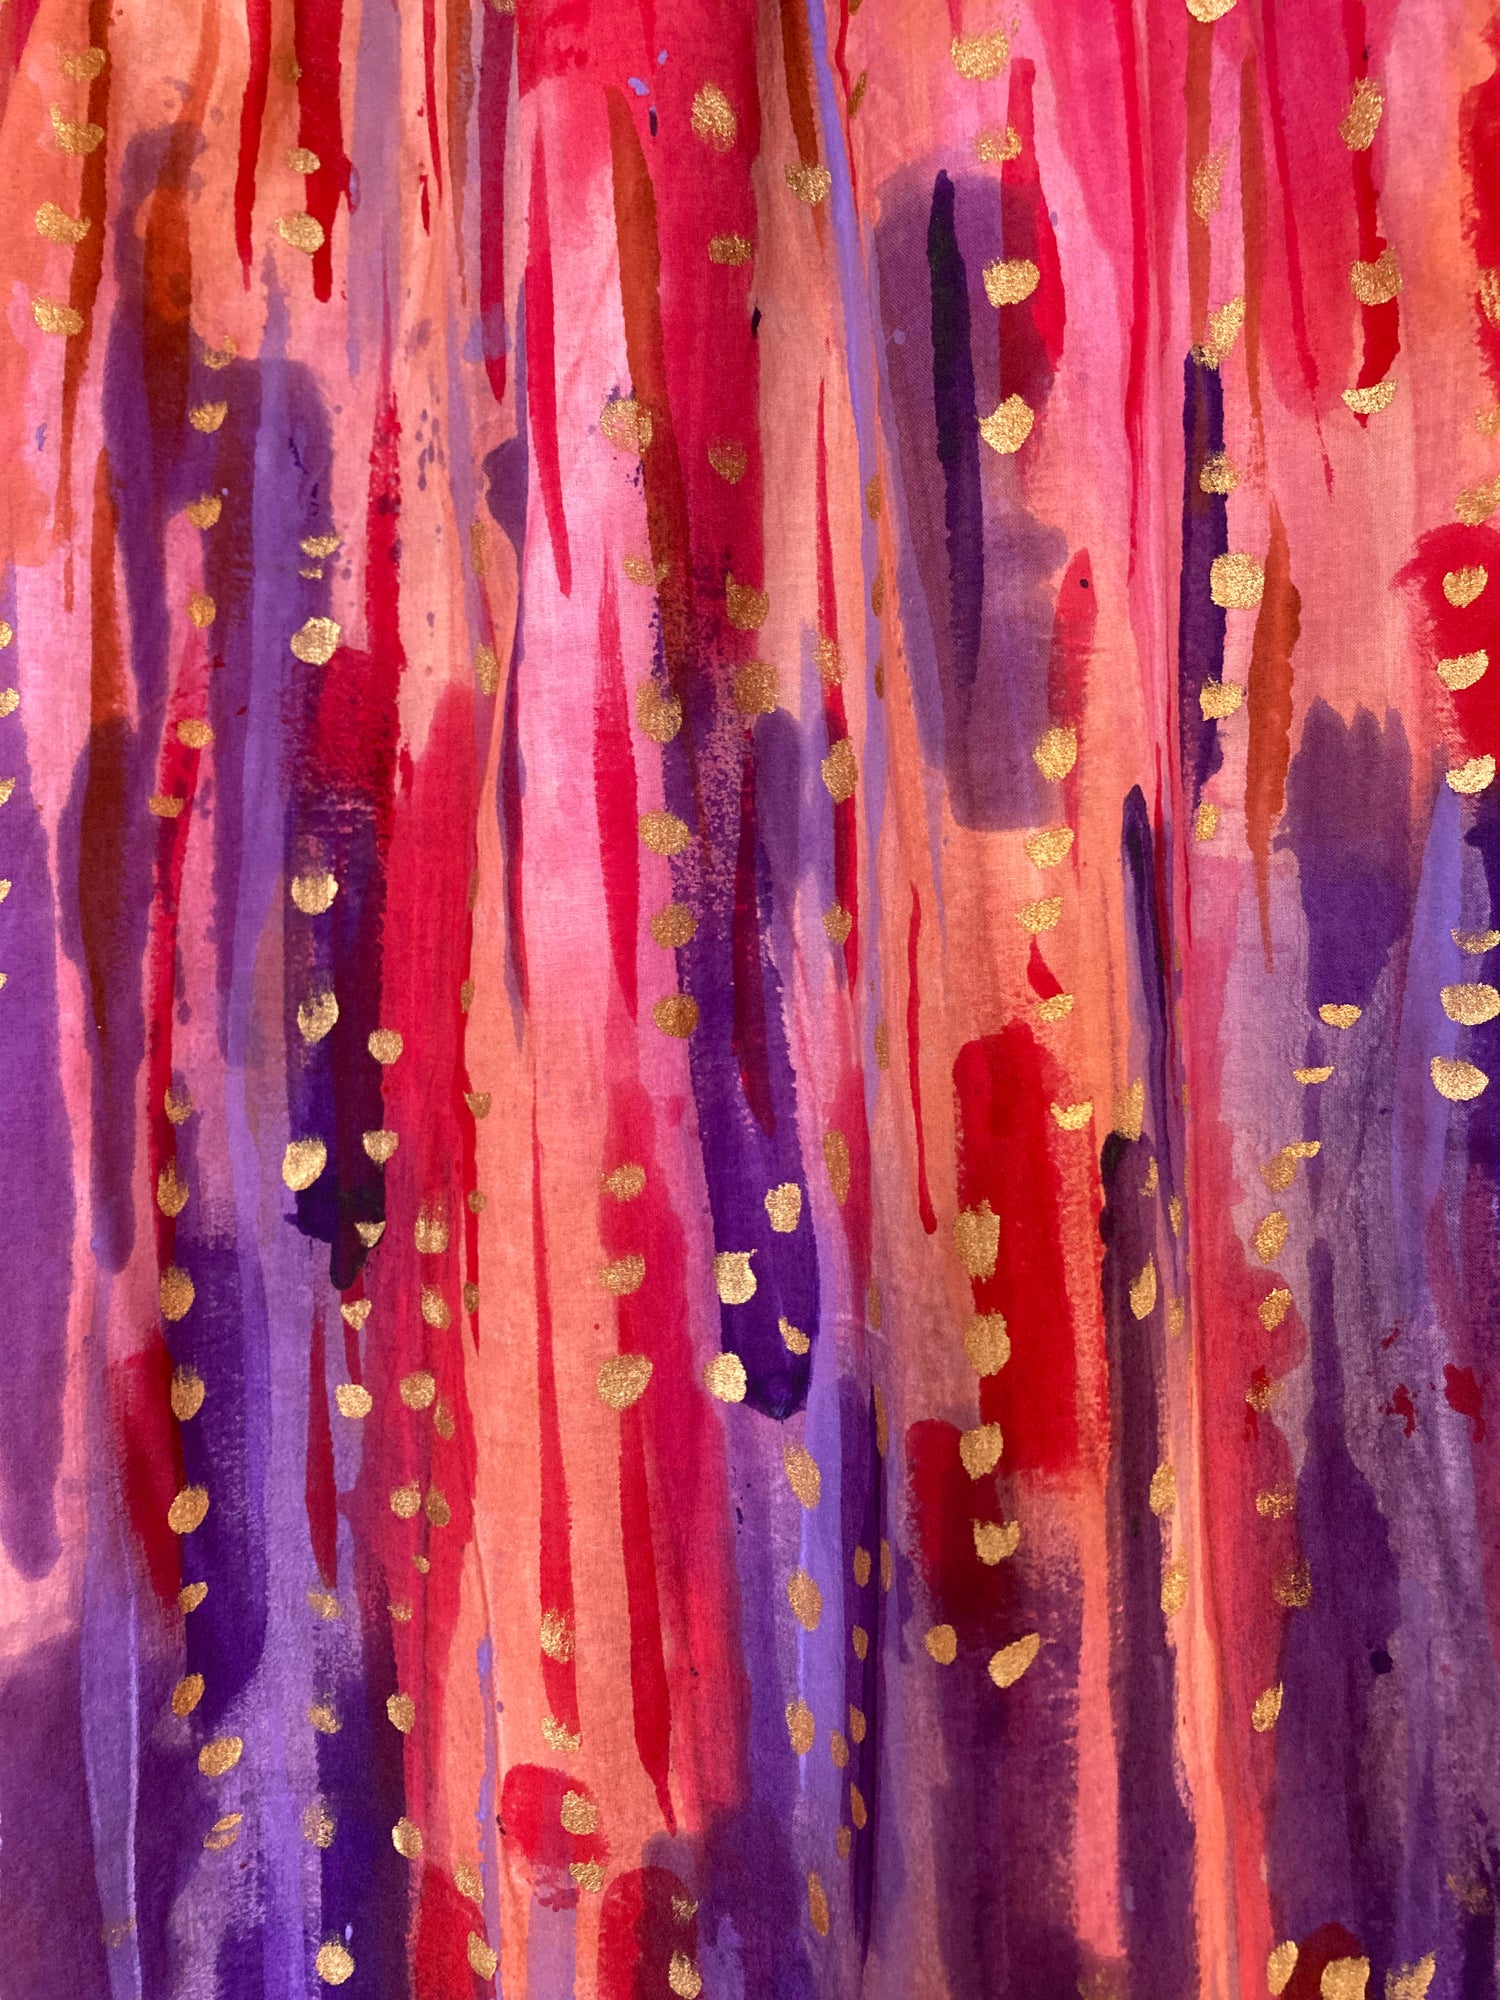 Handpainted fabric. Strokes of dadk/mid purple are concentrated towards rhe bottom, with salmon orange and red strokes concentrated towards the top. Gold dots accent the paintstrokes. 